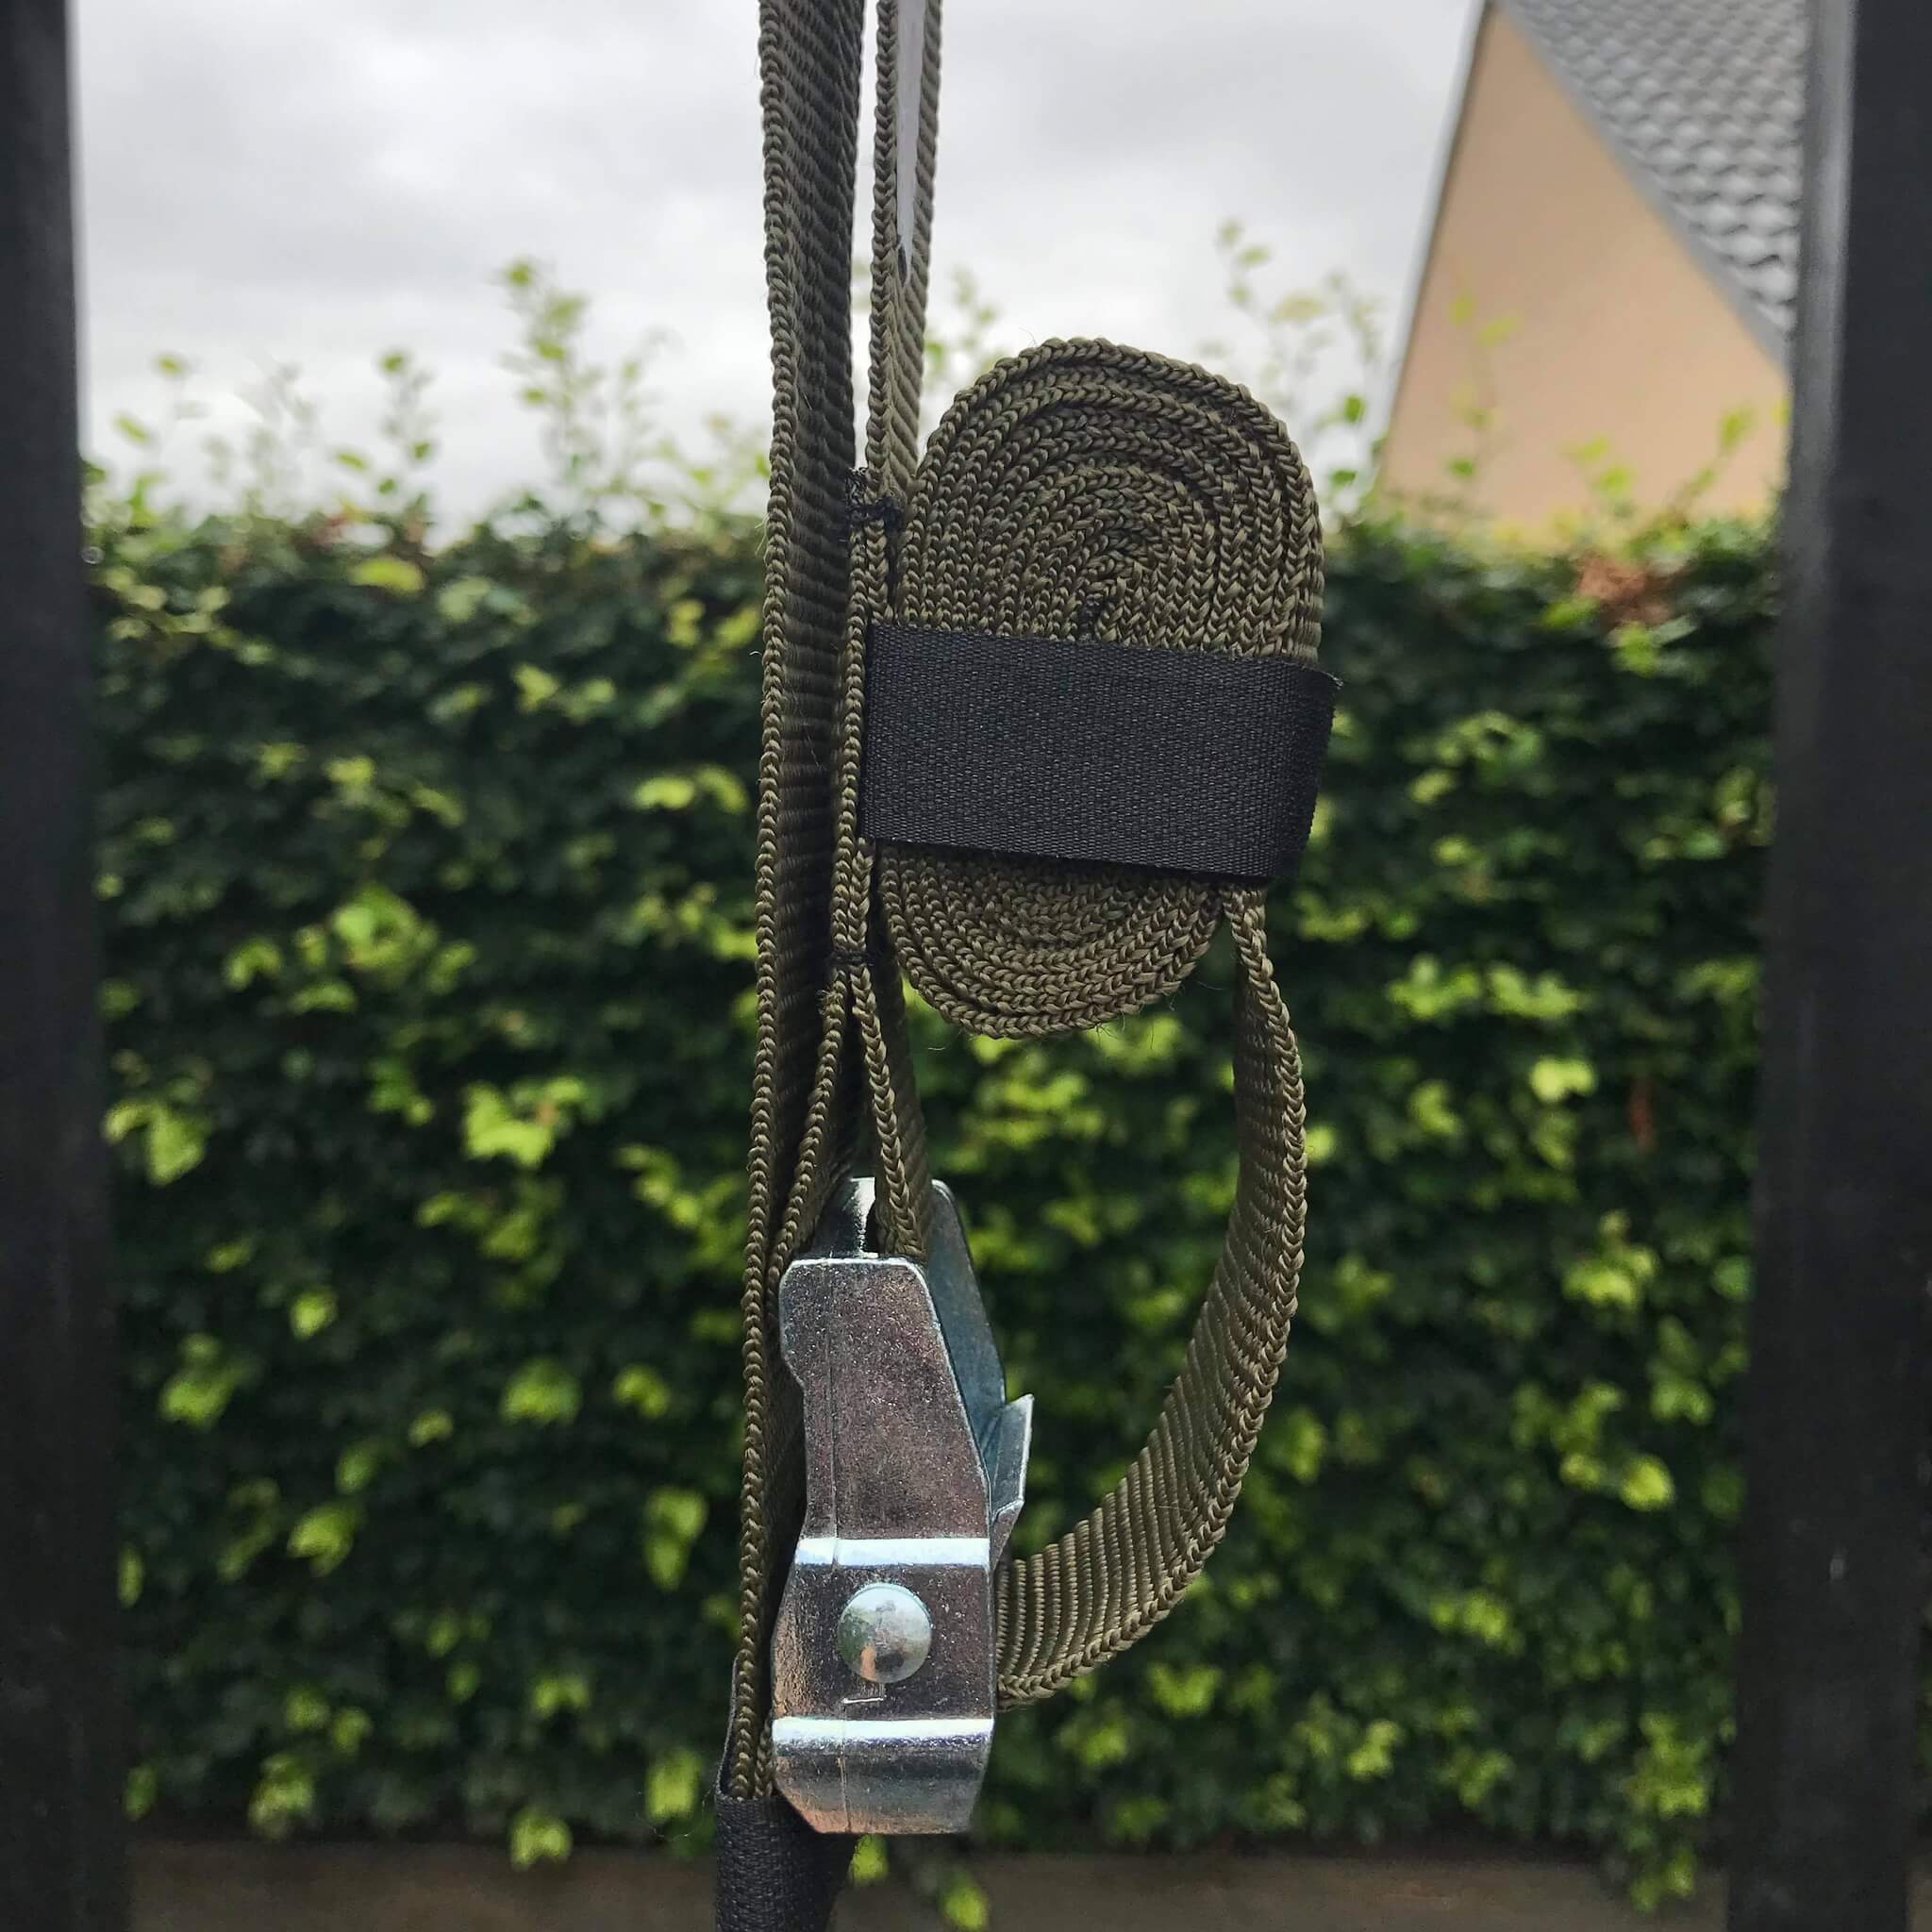 Cam Buckle Straps - 15 Ft